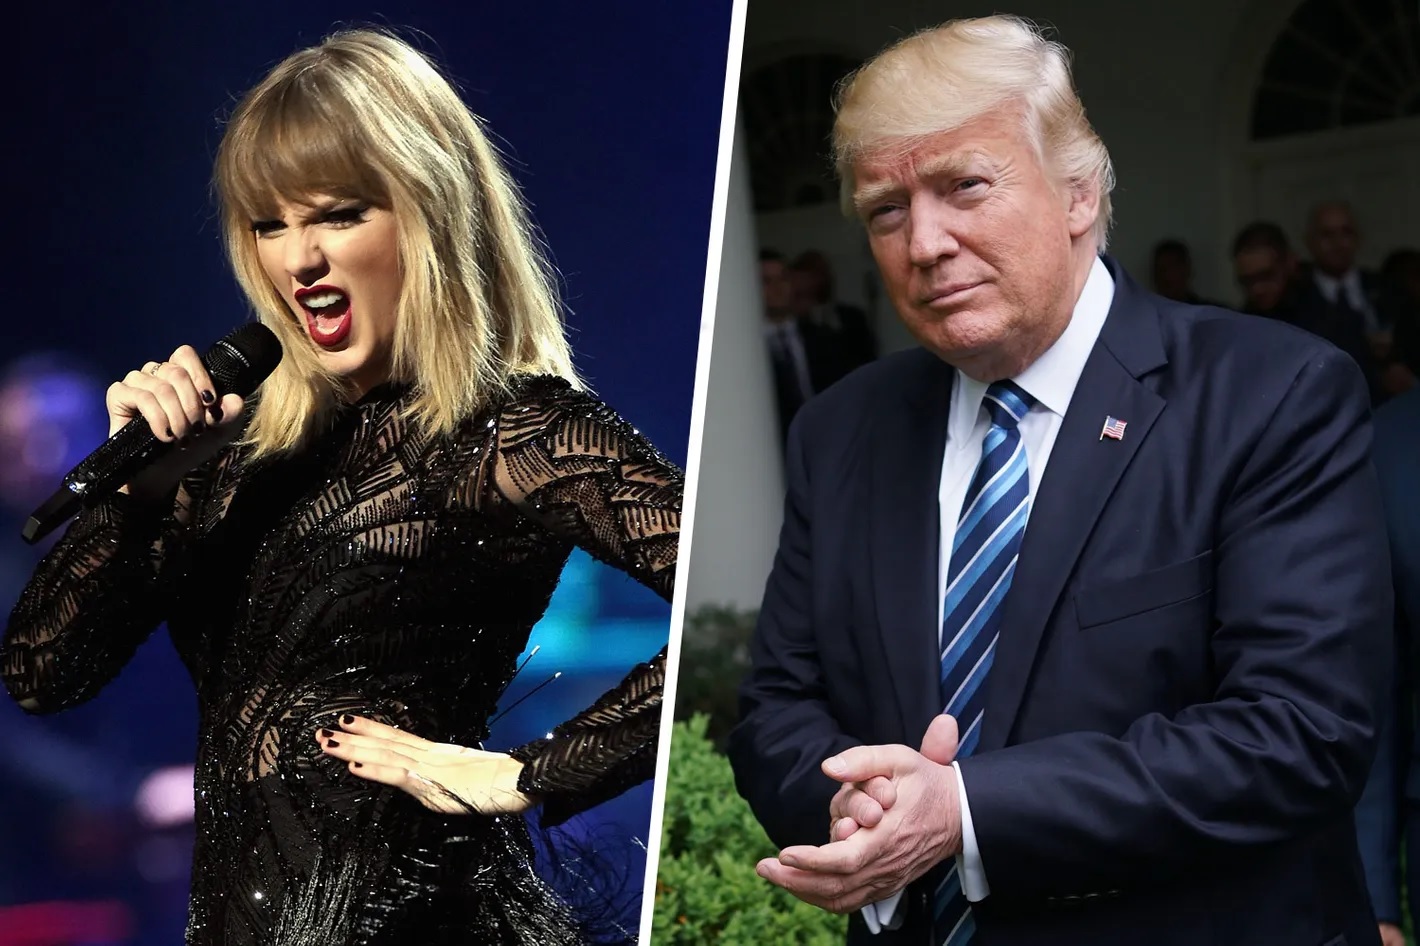 Taylor Swift explains why she wants speak out against Donald Trump